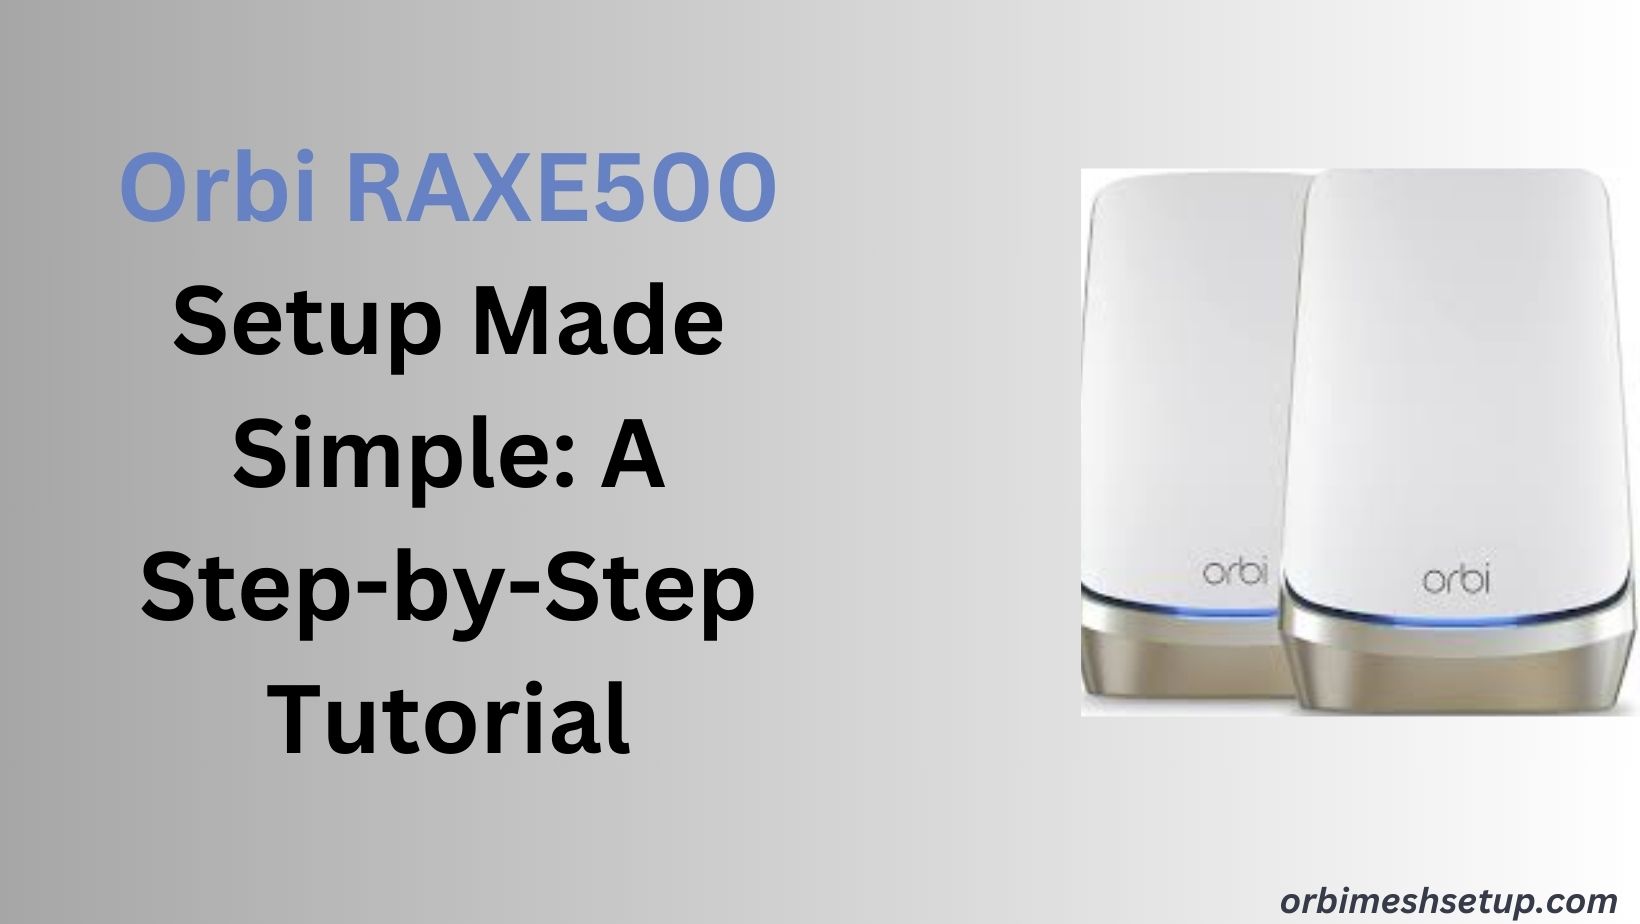 Read more about the article Orbi RAXE500 Setup Made Simple: A Step-by-Step Tutorial